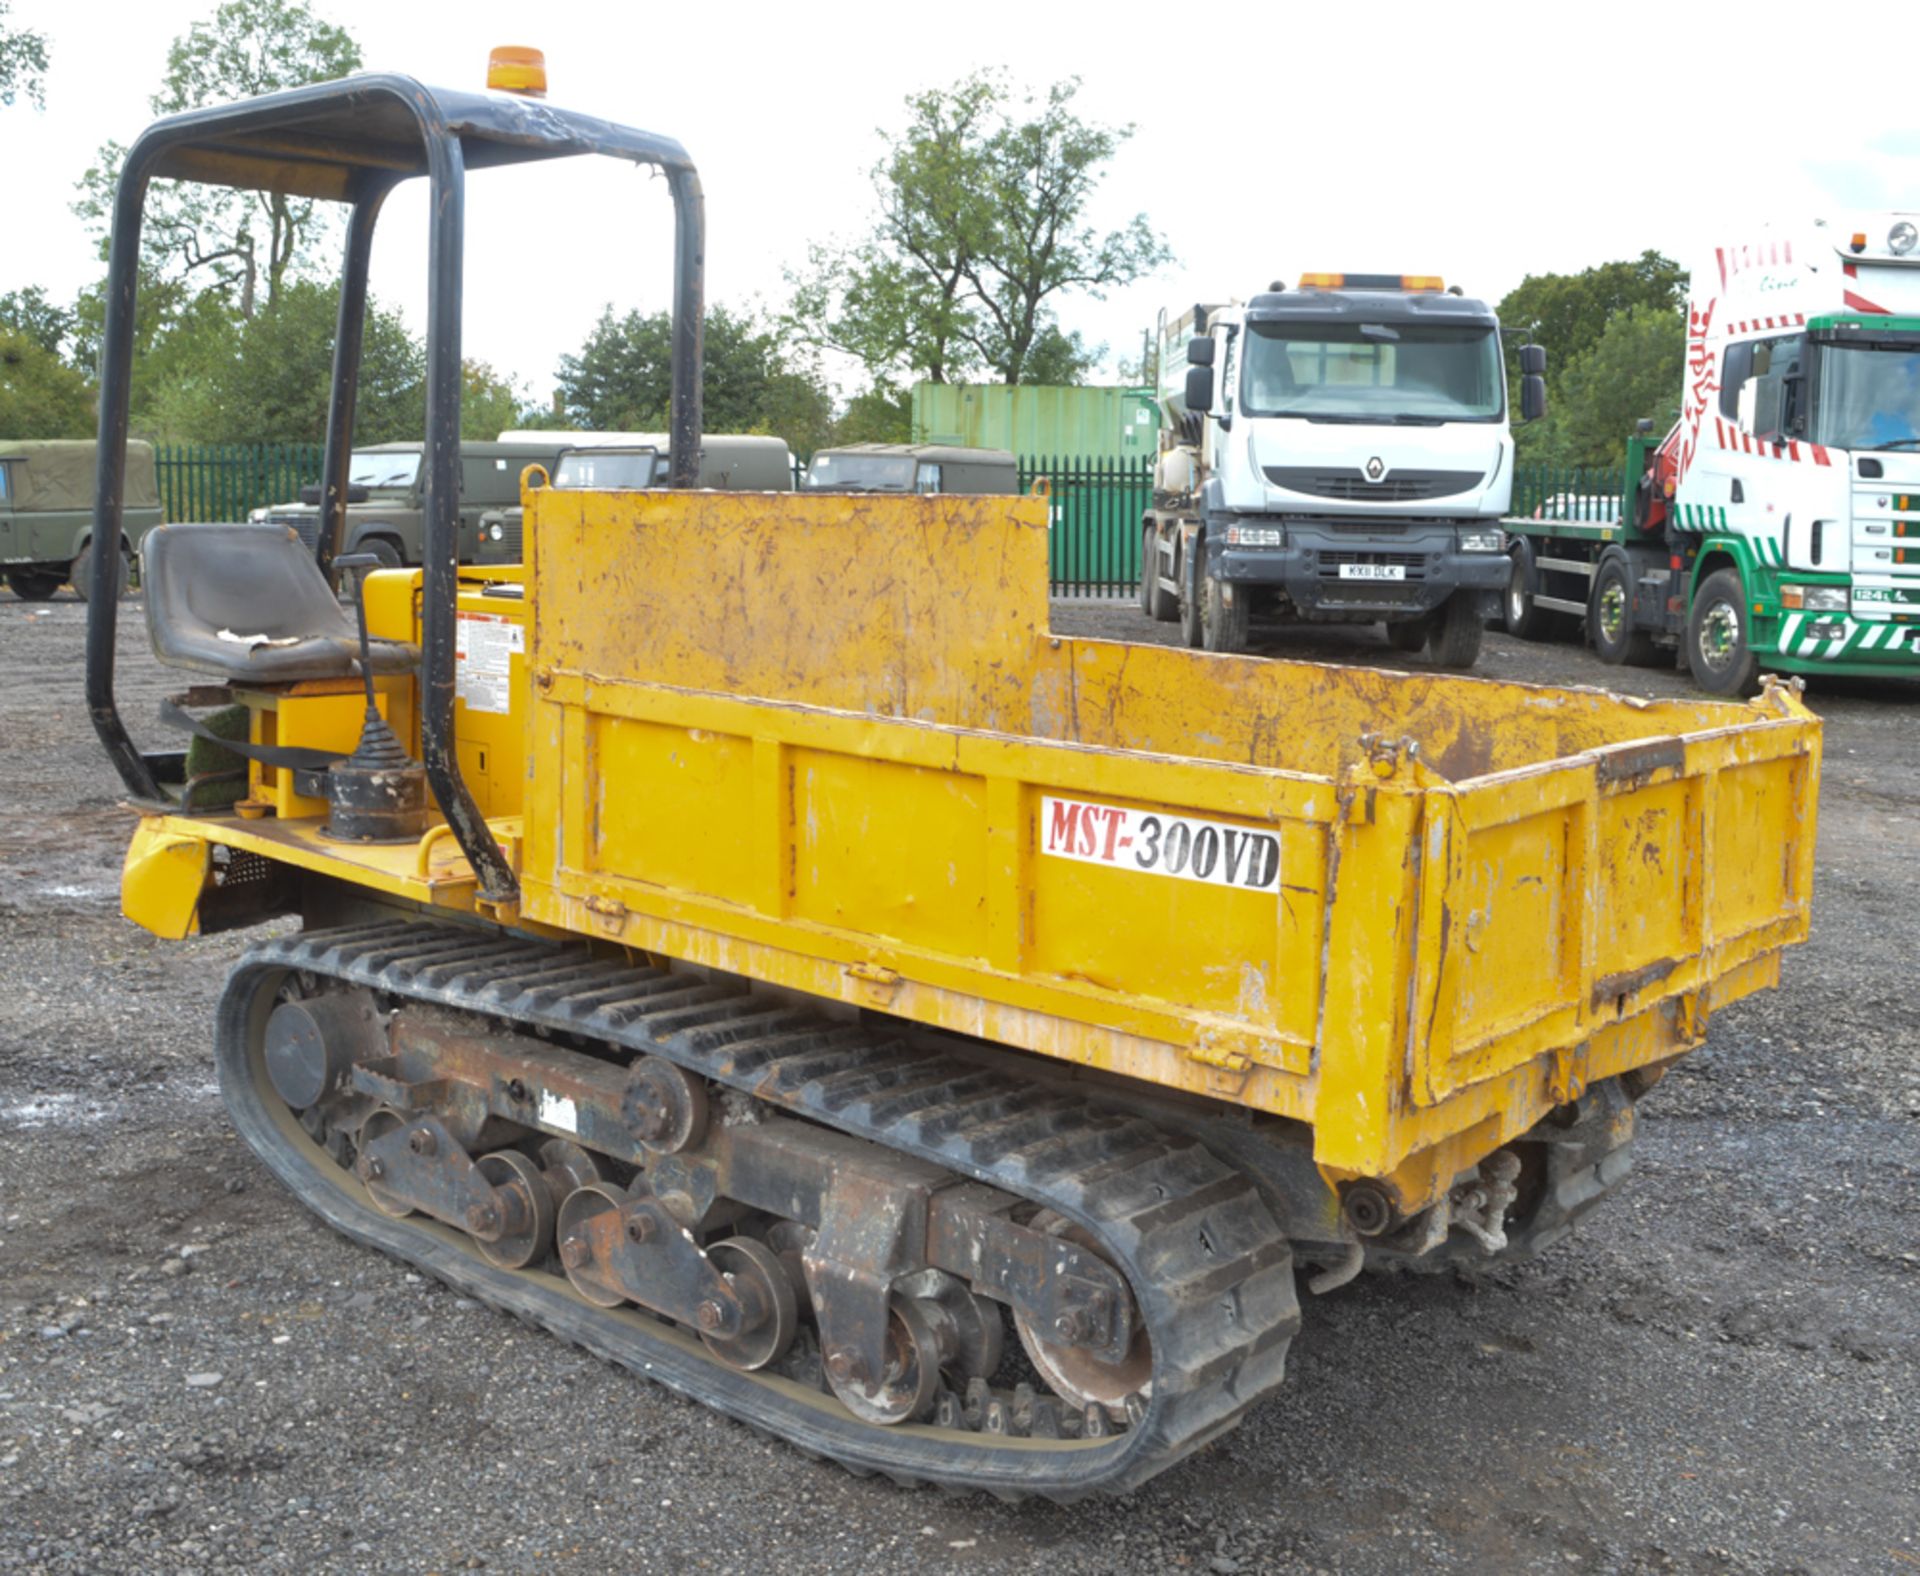 Morooka MST 300-VD 2.5 tonne rubber tracked dumper  Year: 2002 S/N: 3481 Recorded hours: 1103